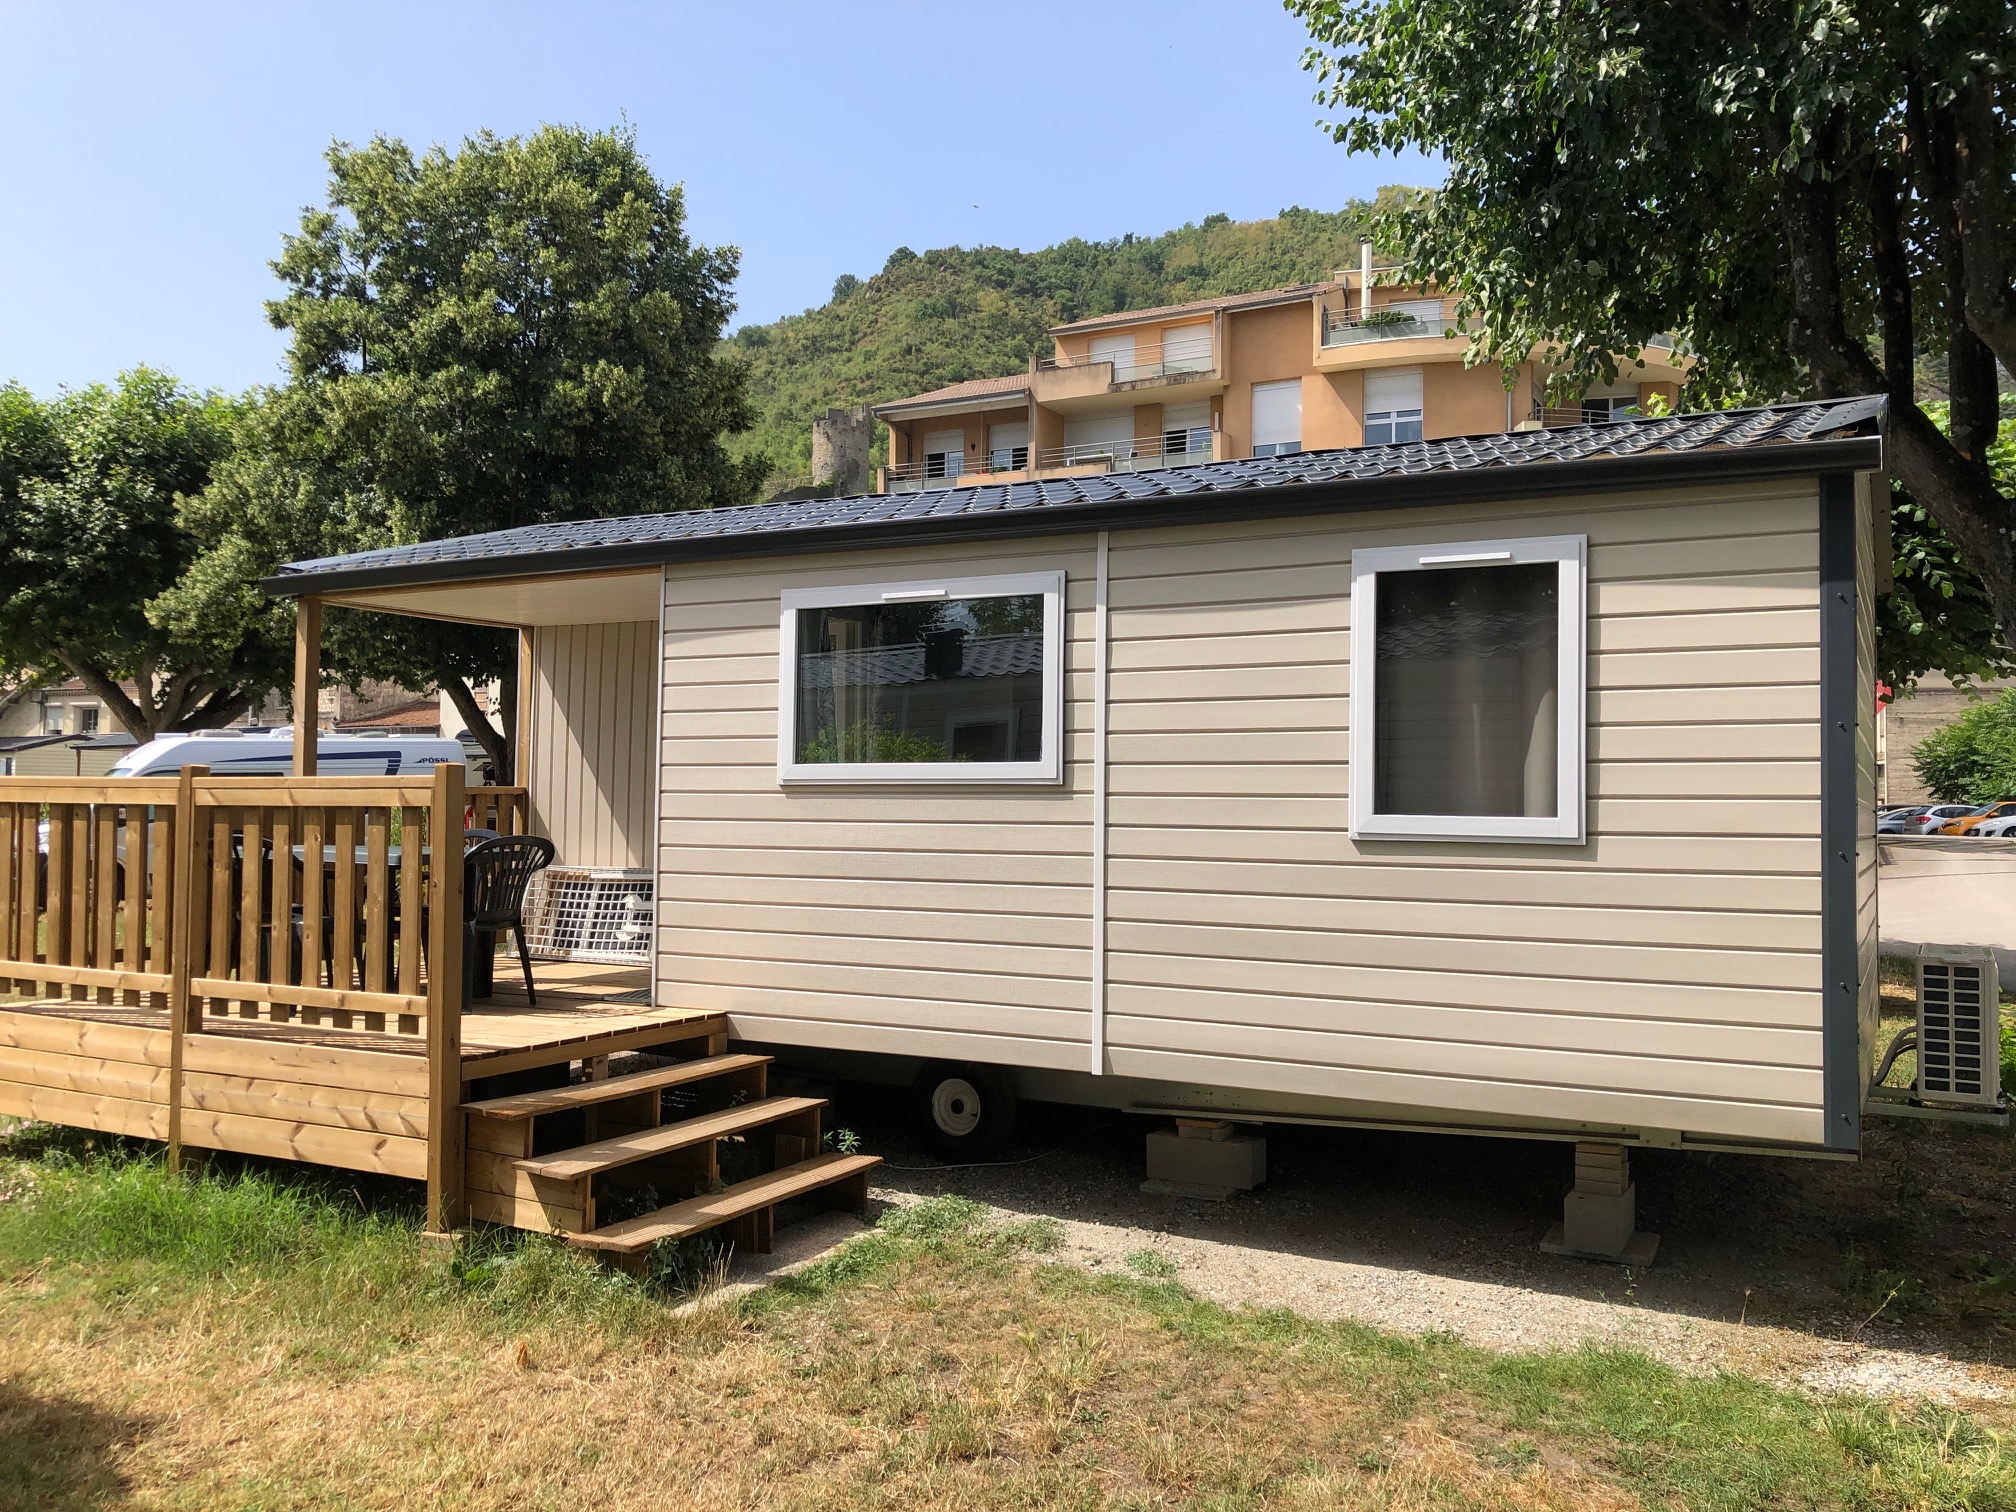 Mietunterkunft - Mobilheim 3/4 Pers. 29 M2, 2 Bedrooms, Bathroom, Wc, With Decking And Air-Conditioning - Camping Le Rhône